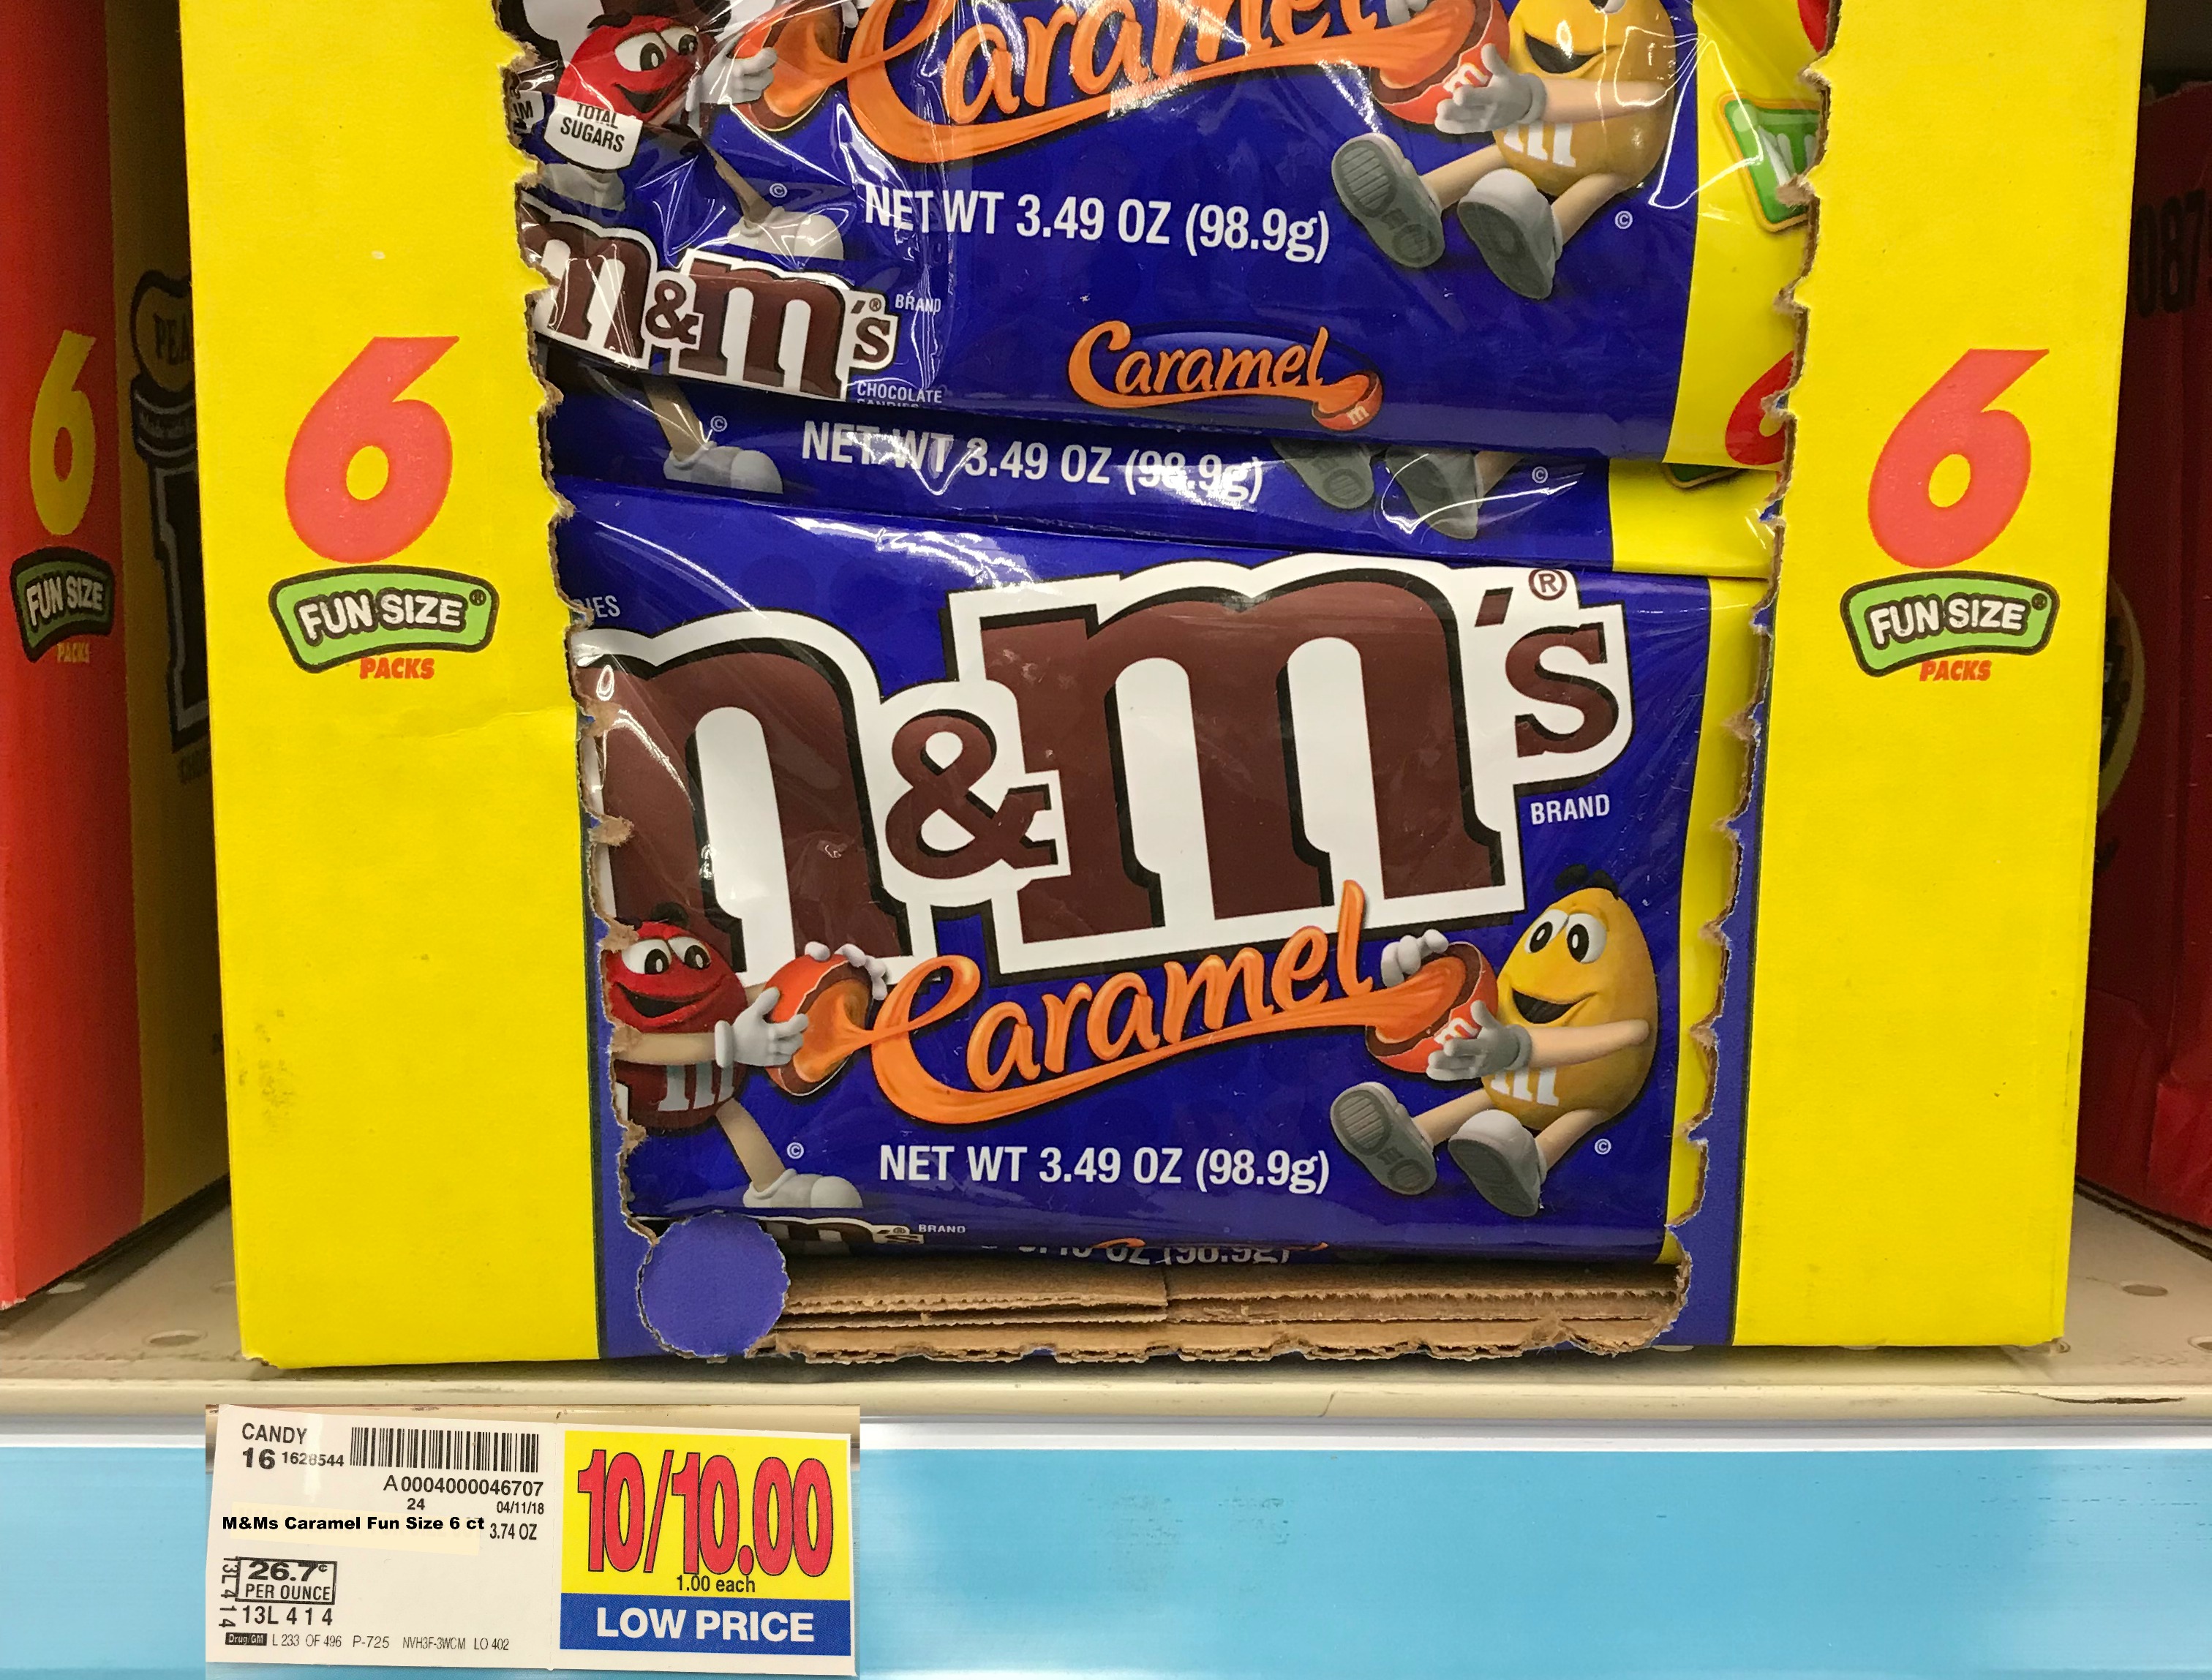 M&M's Caramel Fun Size Chocolate Candy, 3.49 ounce bag, 6 pack, Packaged  Candy